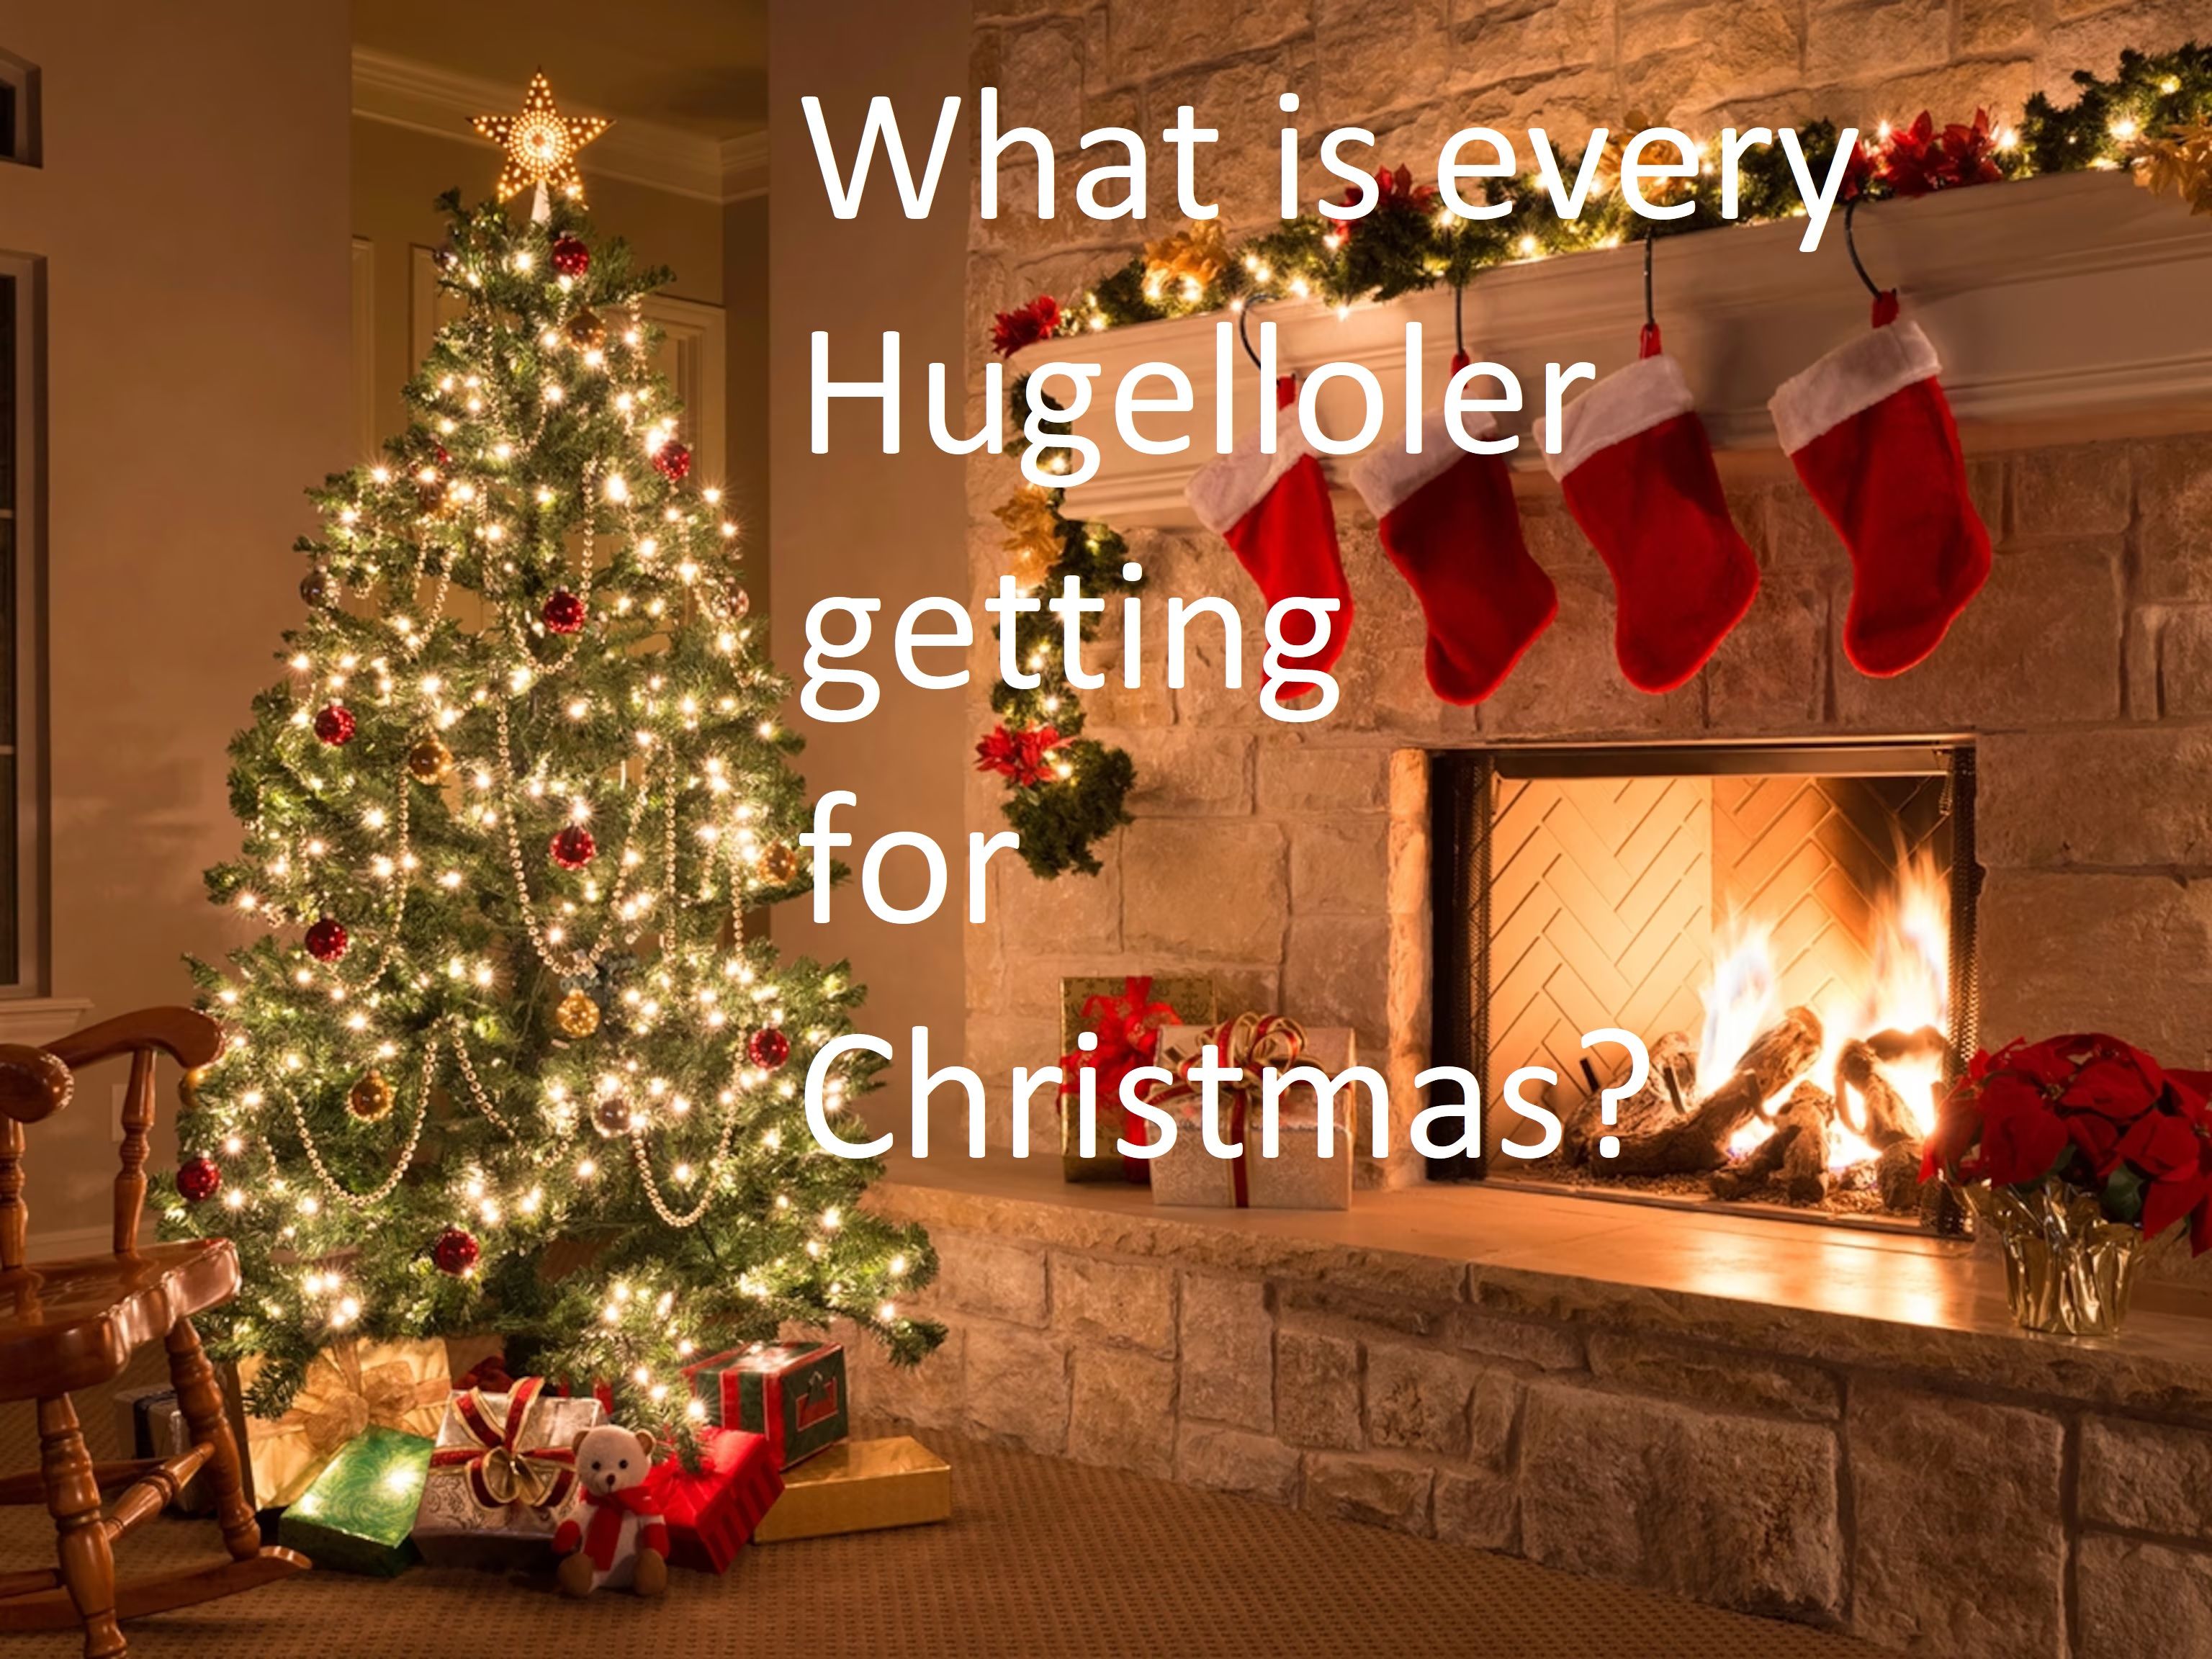 Write in the comments what you think other Hugelollers will get